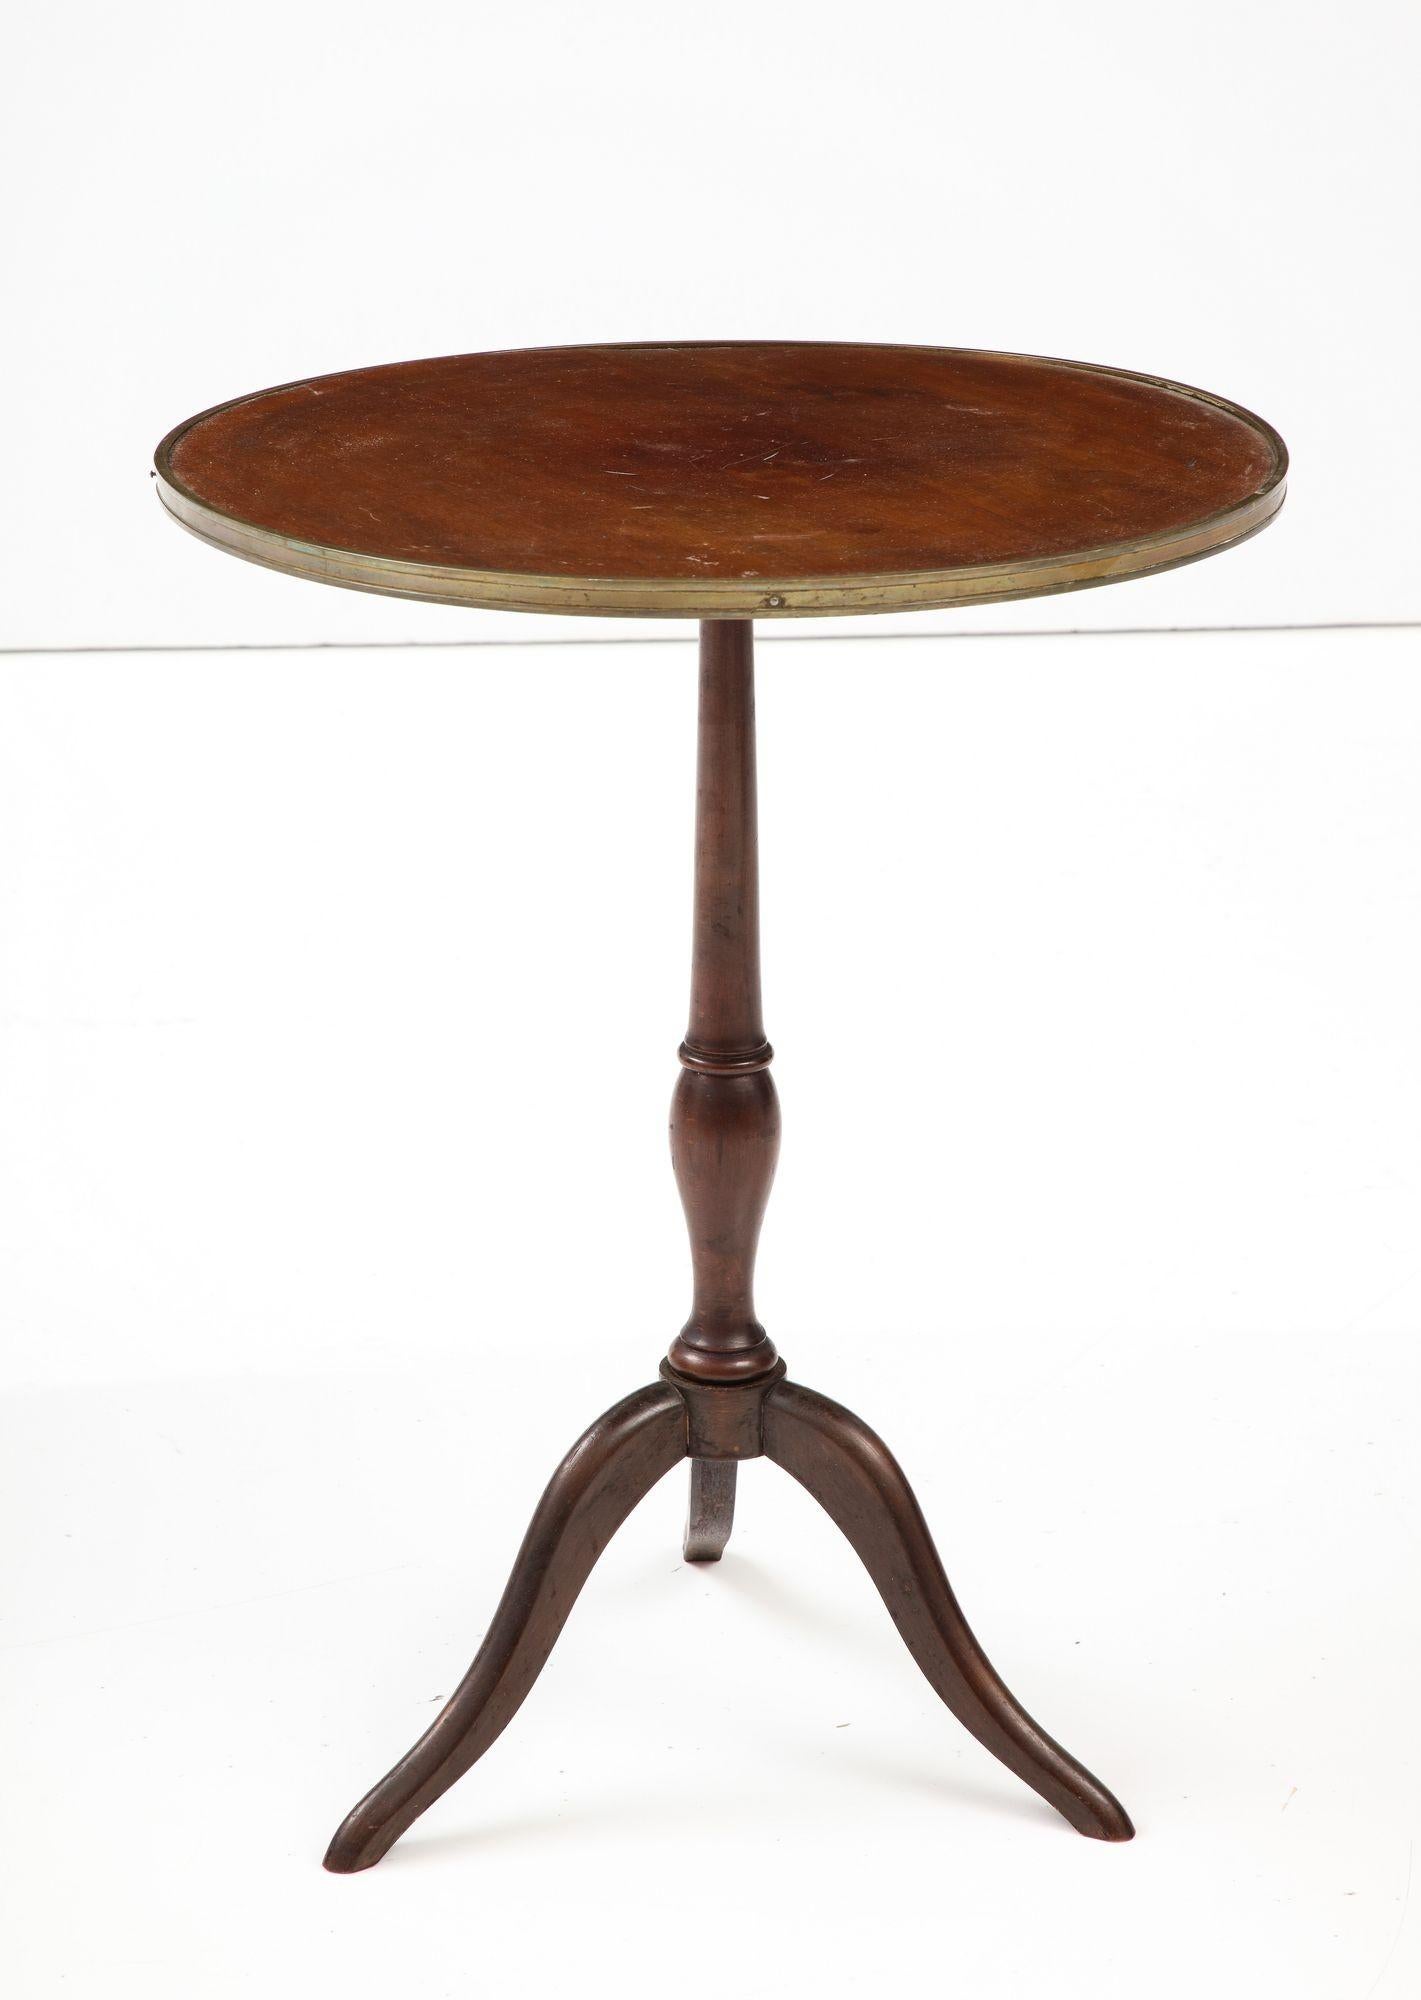 Mid-20th Century French, Gueridon Round Pedestal Side Table, 1940s